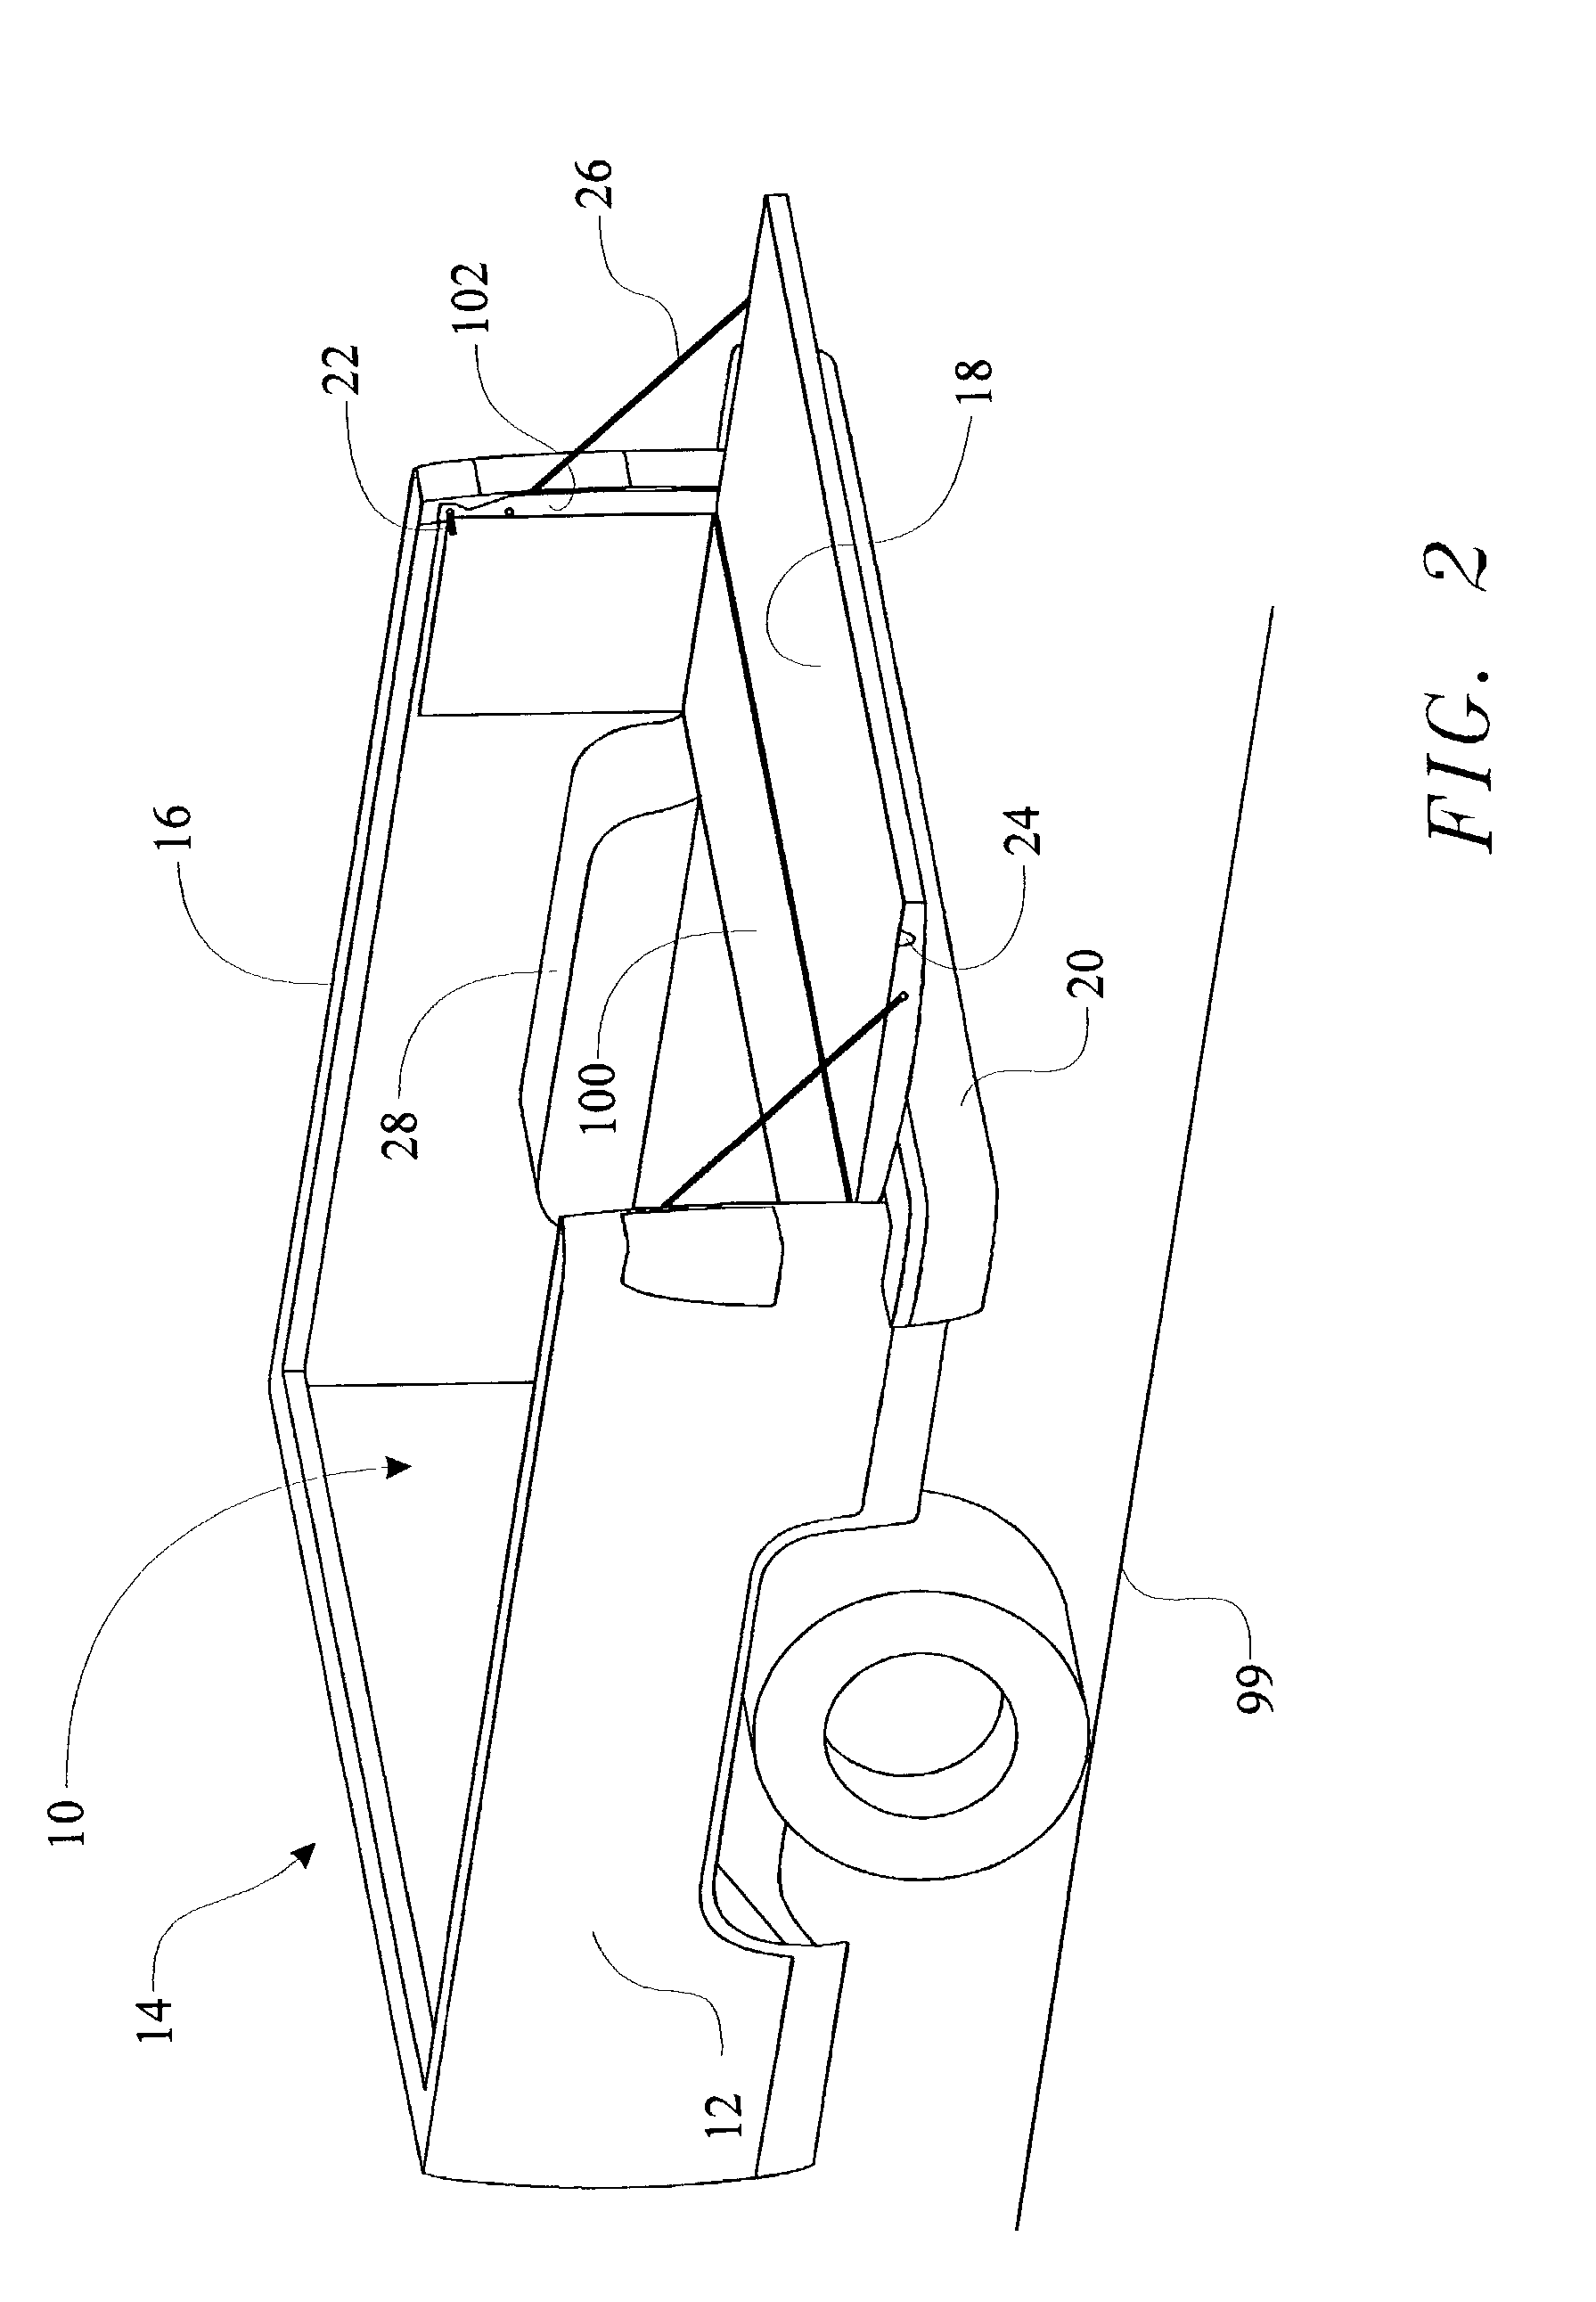 Bed extension and stepgate pickup truck apparatus